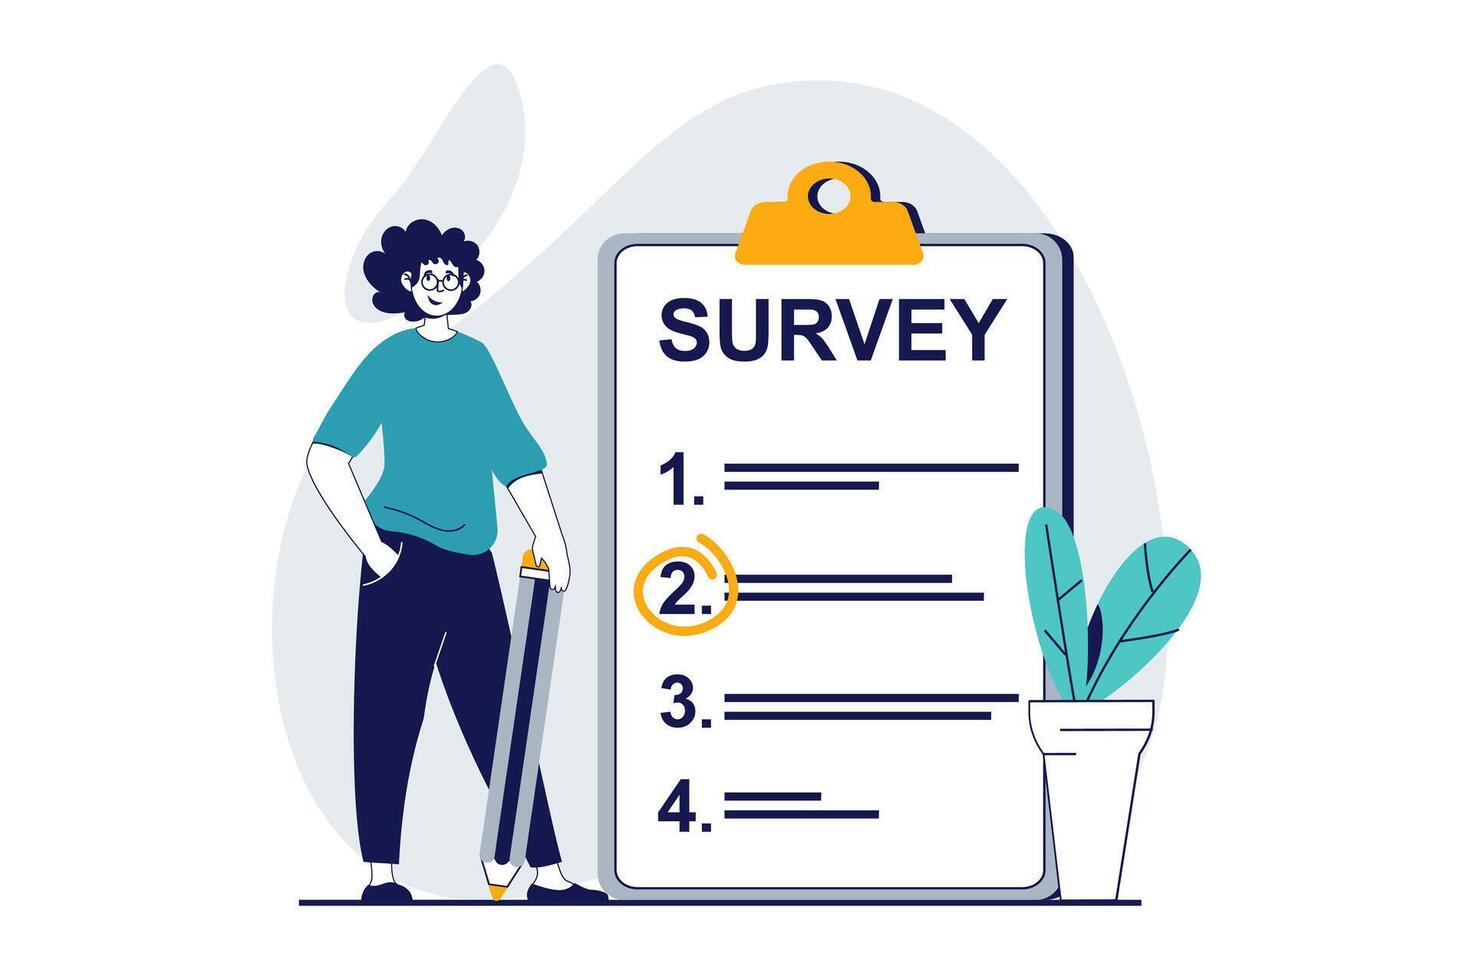 Online survey concept with people scene in flat design for web. Man filling exam questionnaire and taking marks in checklist form. Vector illustration for social media banner, marketing material.